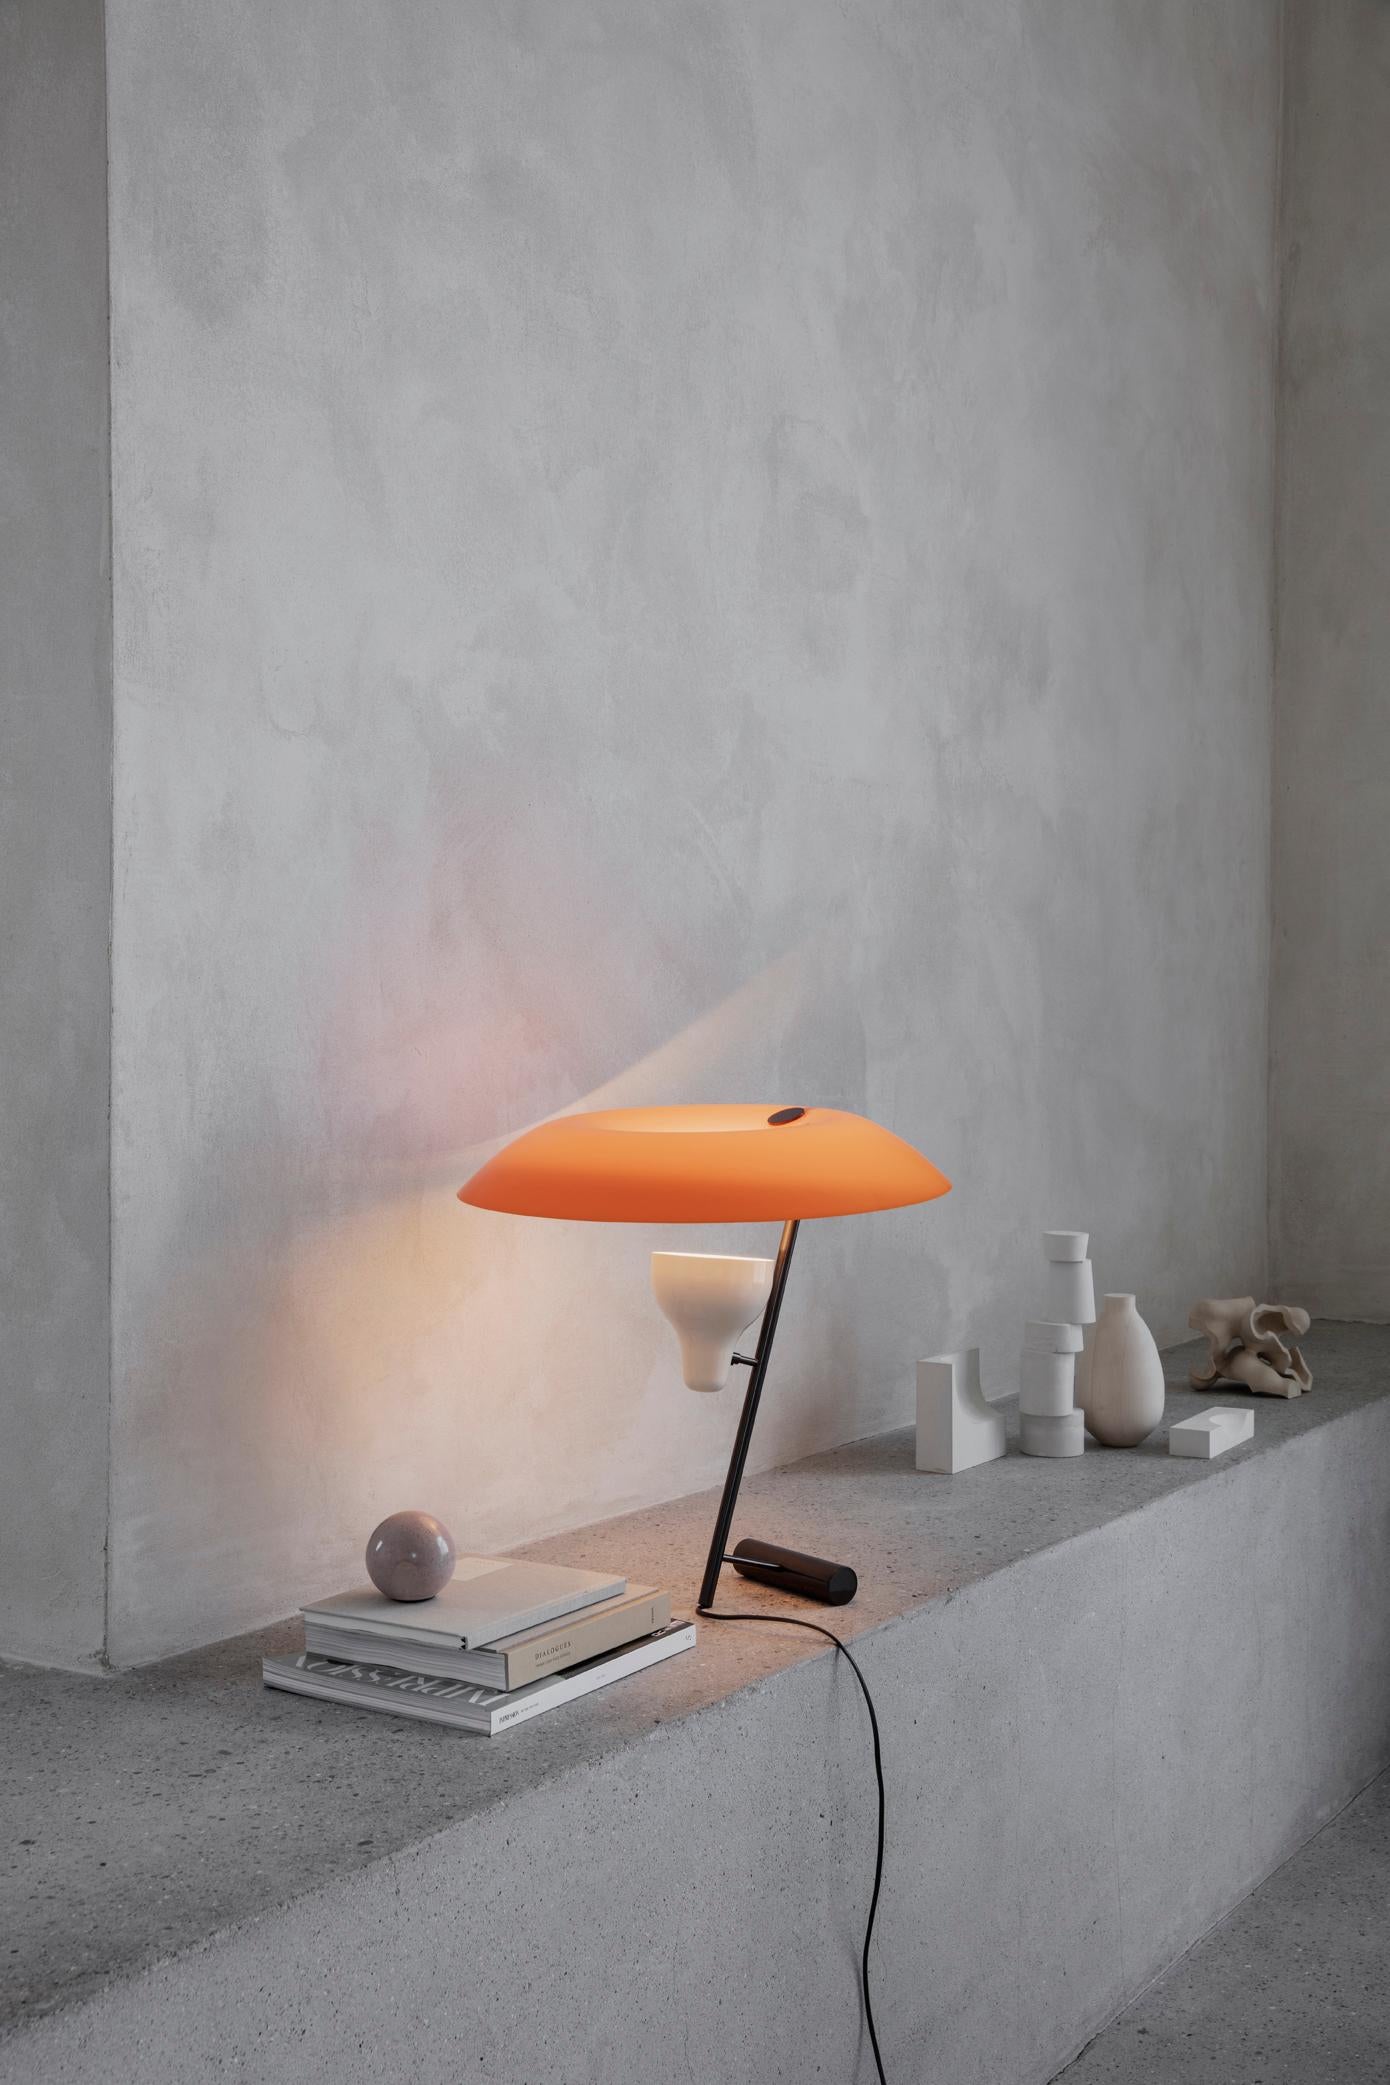 Model 548.
Design by Gino Sarfatti.
The table lamp designed in 1951 is a study in balance and light reflection through a screen, a recurring theme in Gino Sarfatti’s work. Model 548 provides both reflected and diffused light due to the adjustable